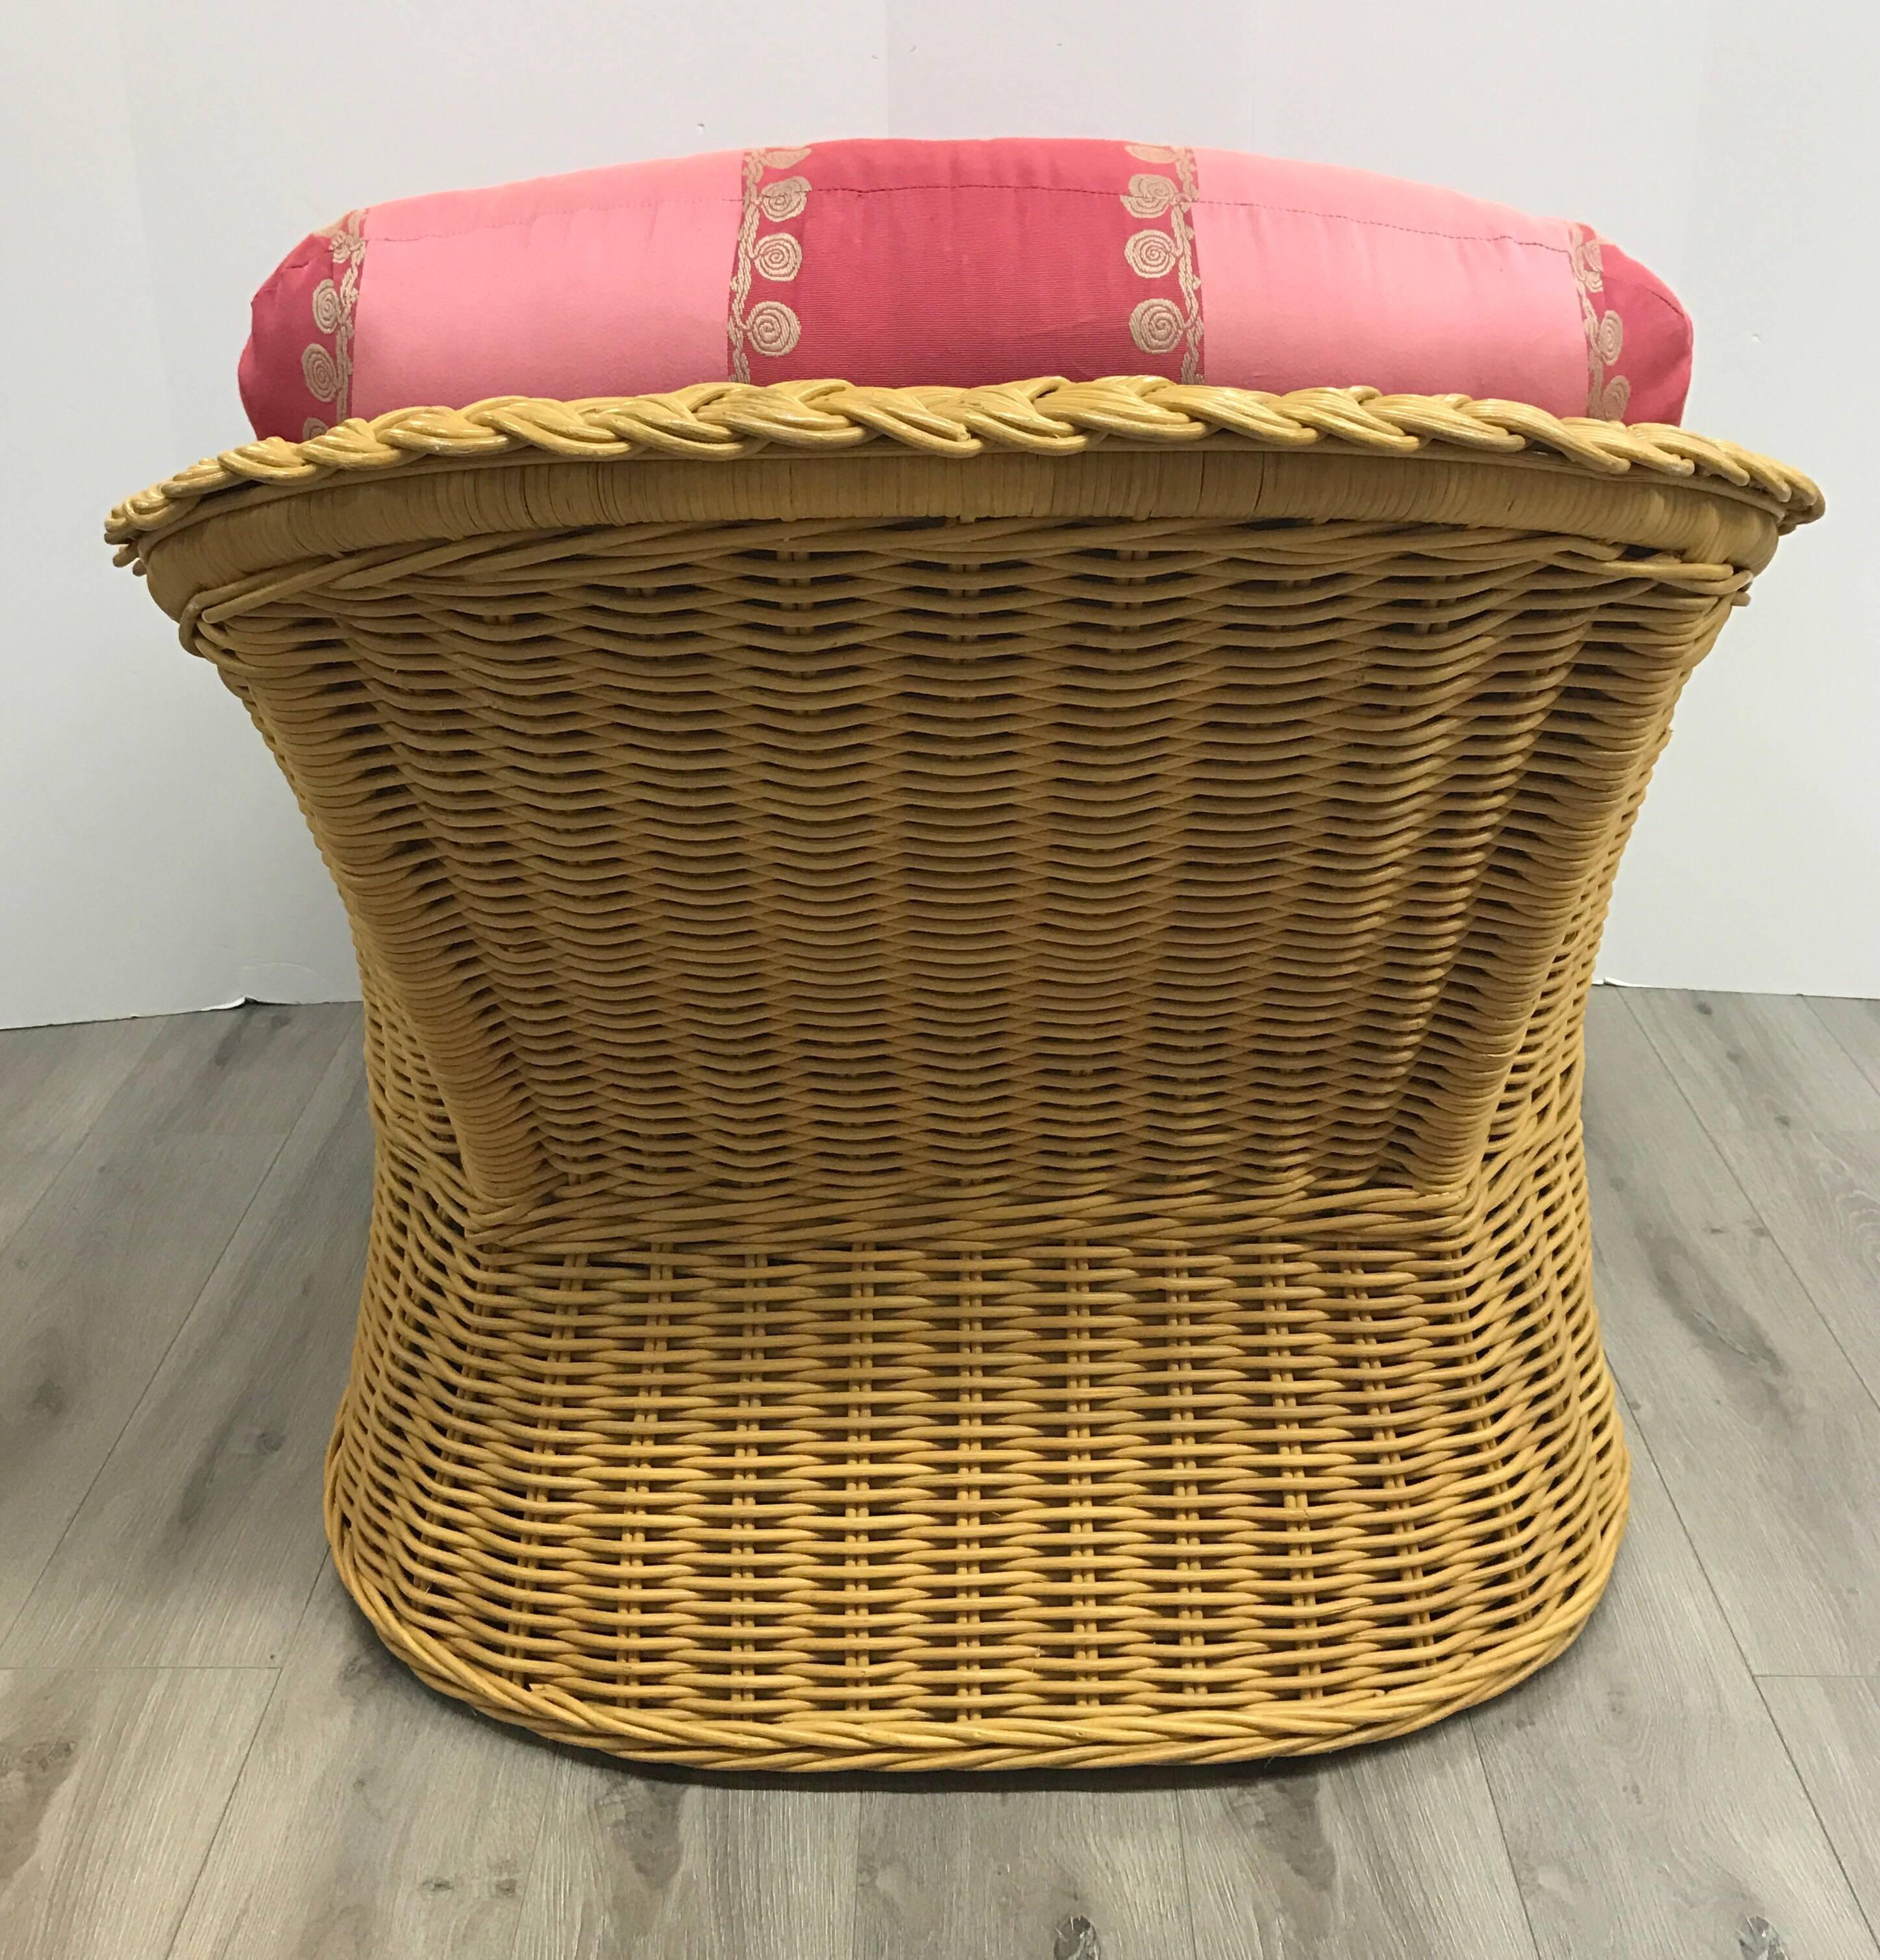 American Pair of Mid-Century Modern Pink Rasberry Wicker Lounge Chair and Ottomans